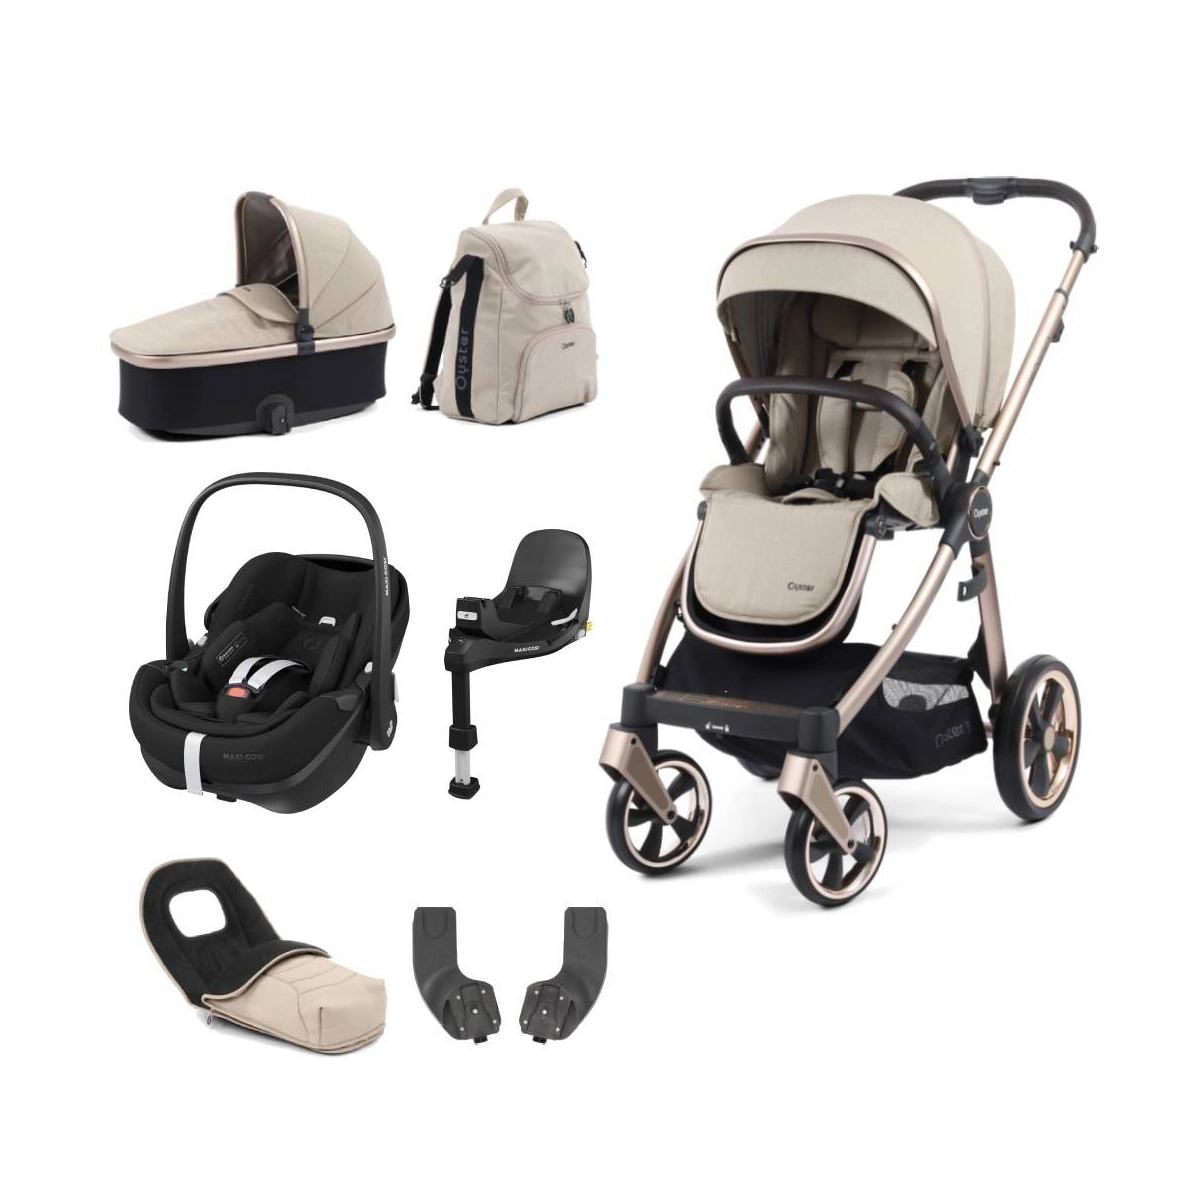 BabyStyle Oyster 3 Champagne Chassis Luxury 7 Piece Bundle with Maxi Cosi Pebble 360 Car Seat & Base